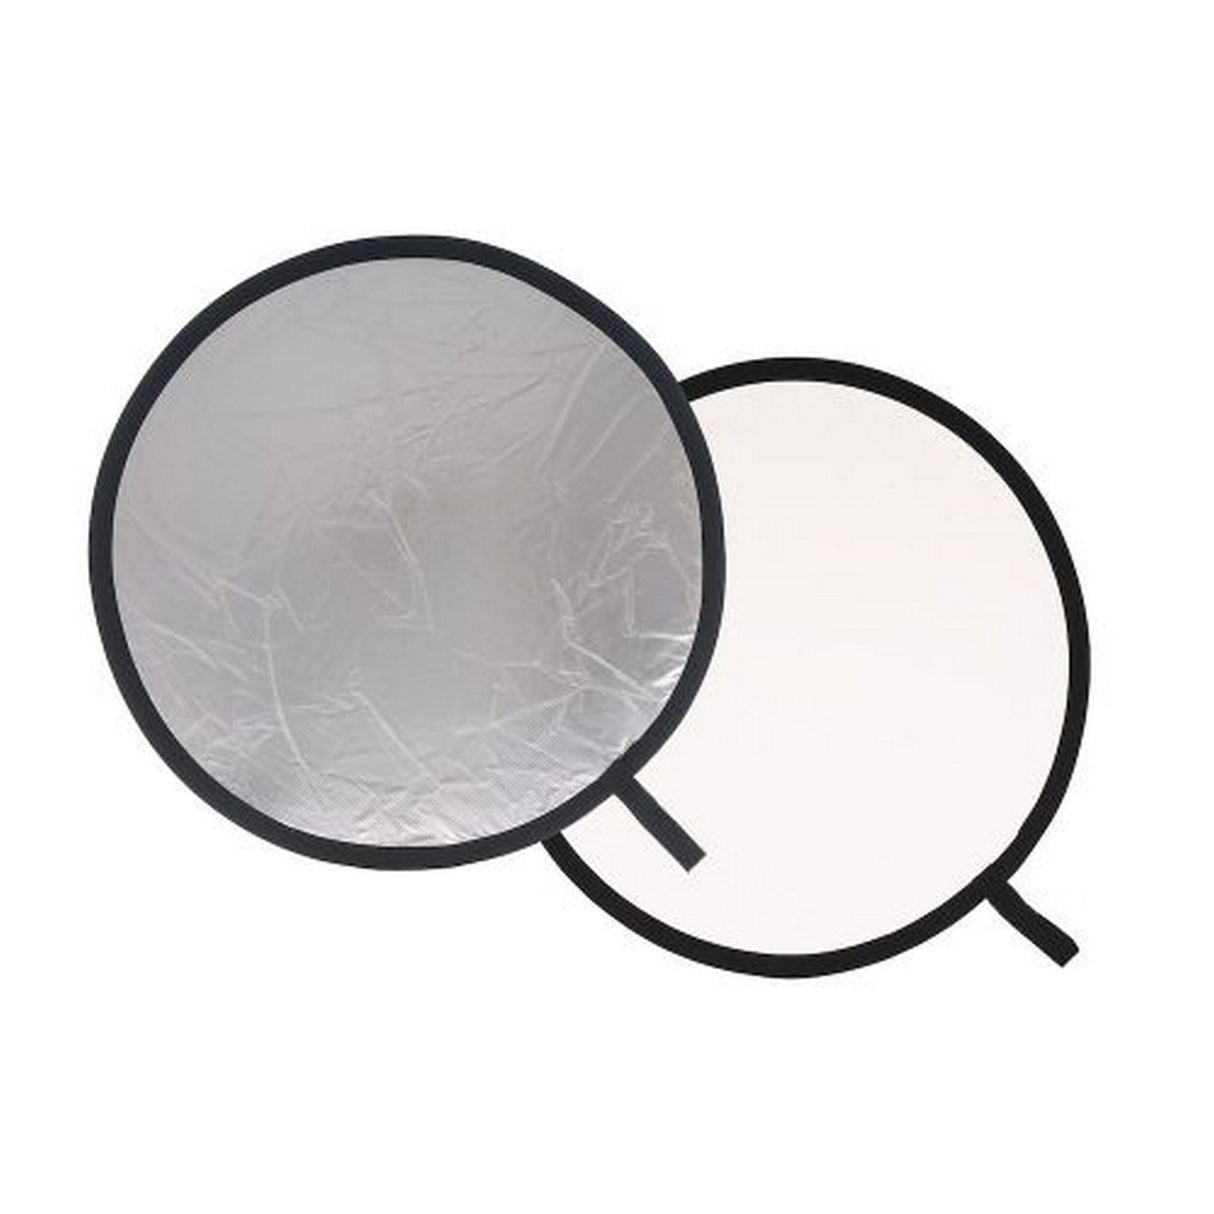 Lastolite LL LR3031 Collapsible 30-Inch Reflector, Silver/White